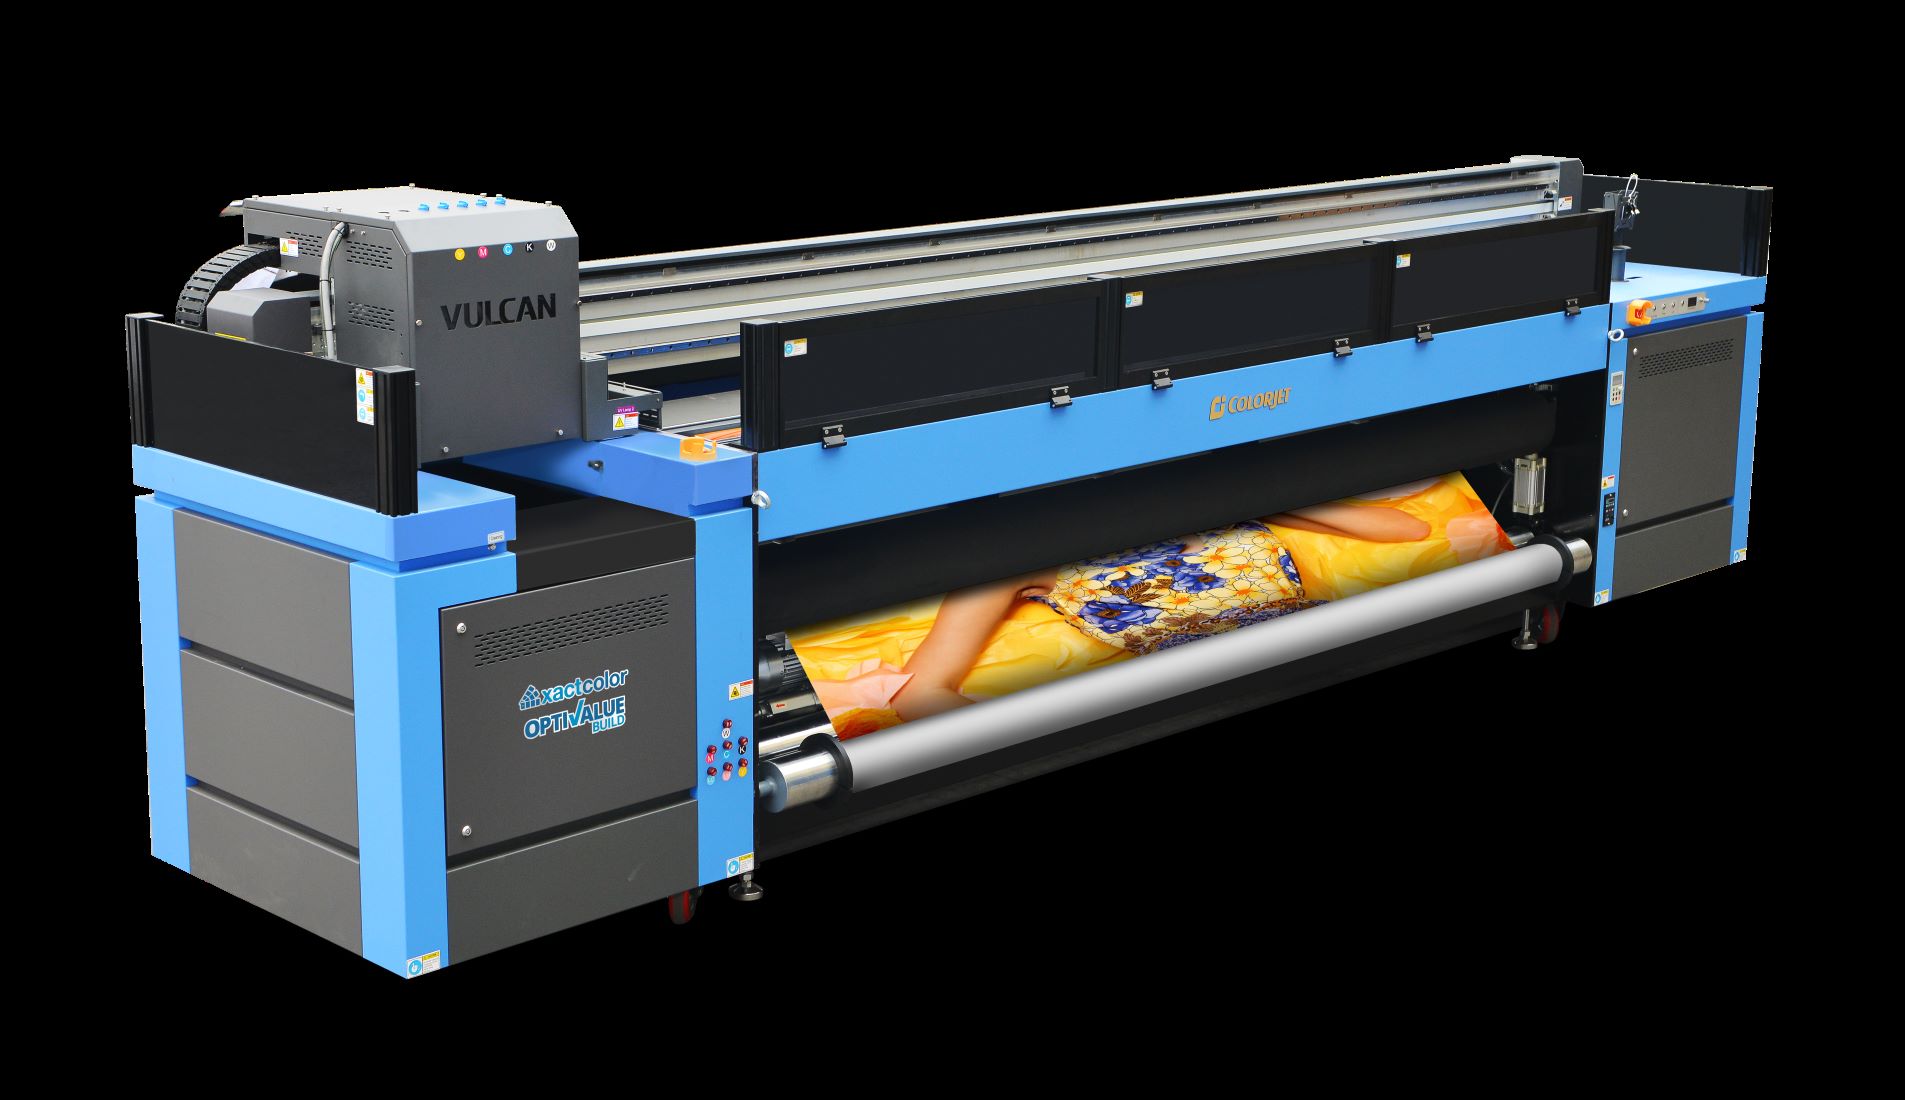 ColorJet eyes expansion with new UK distributor